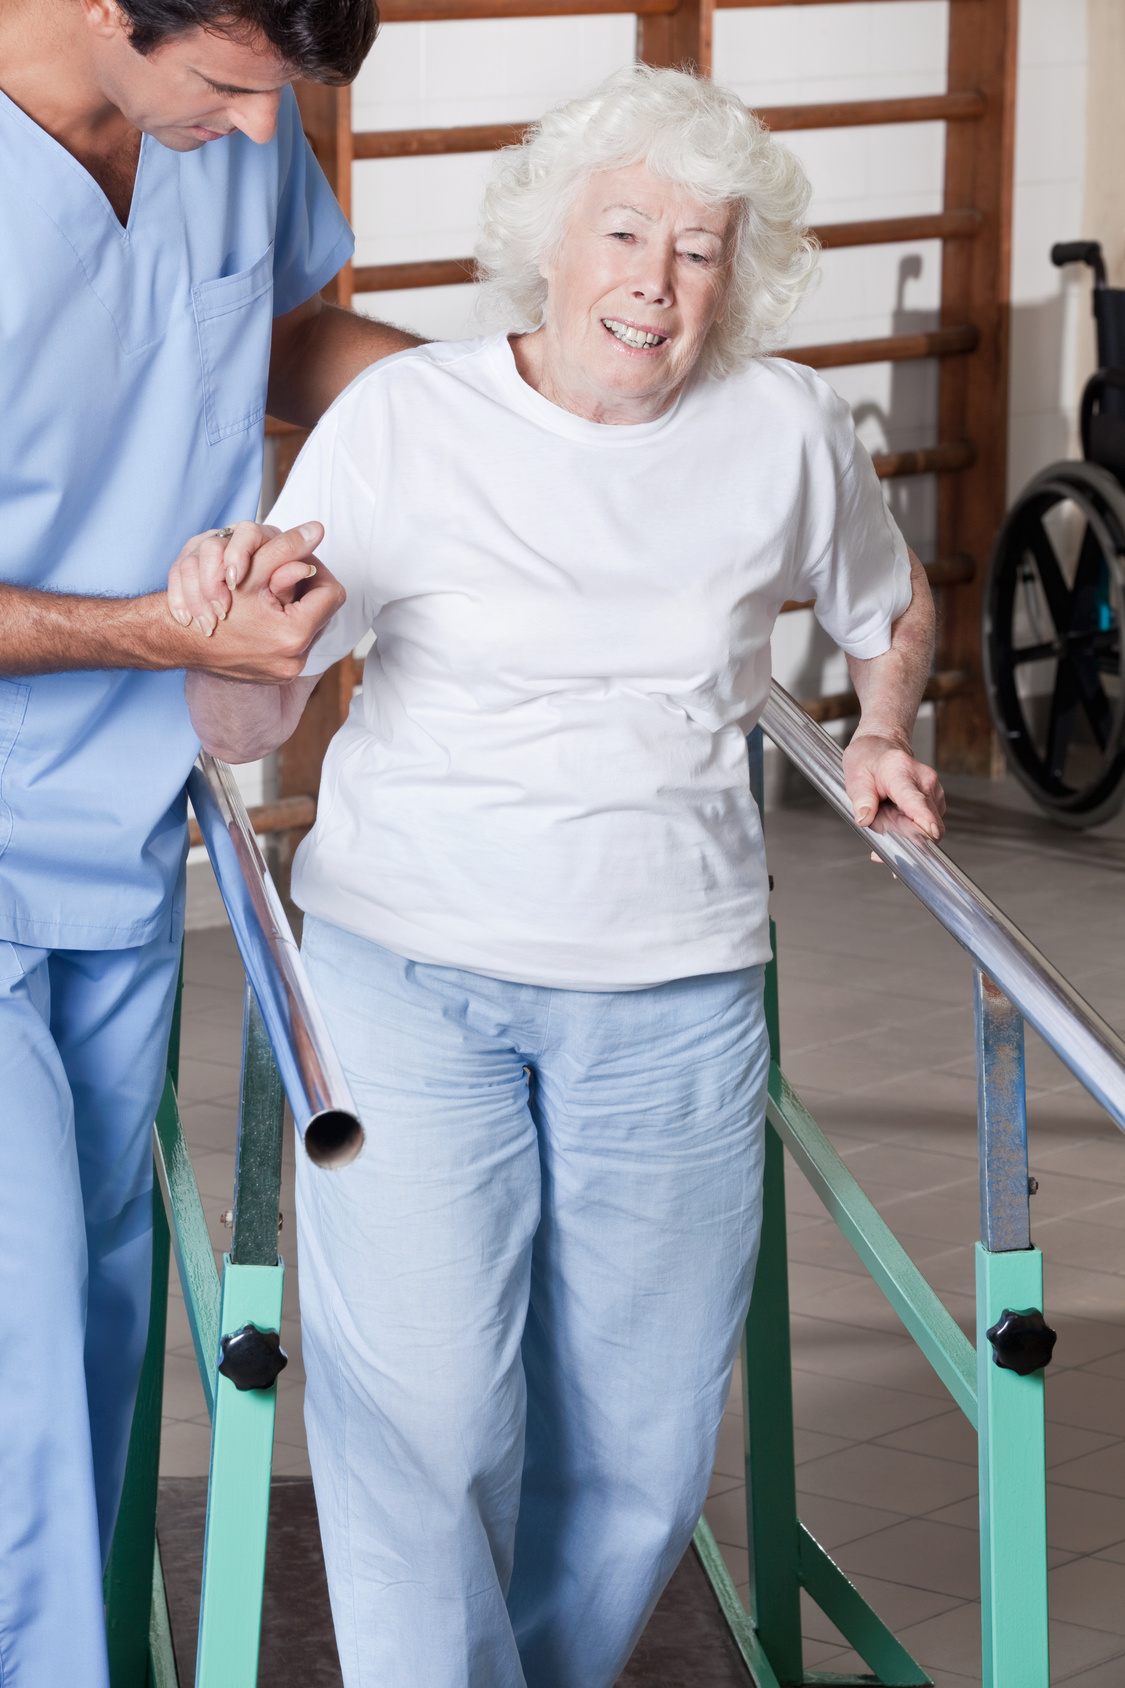 Are you concerned with falls or balance loss?